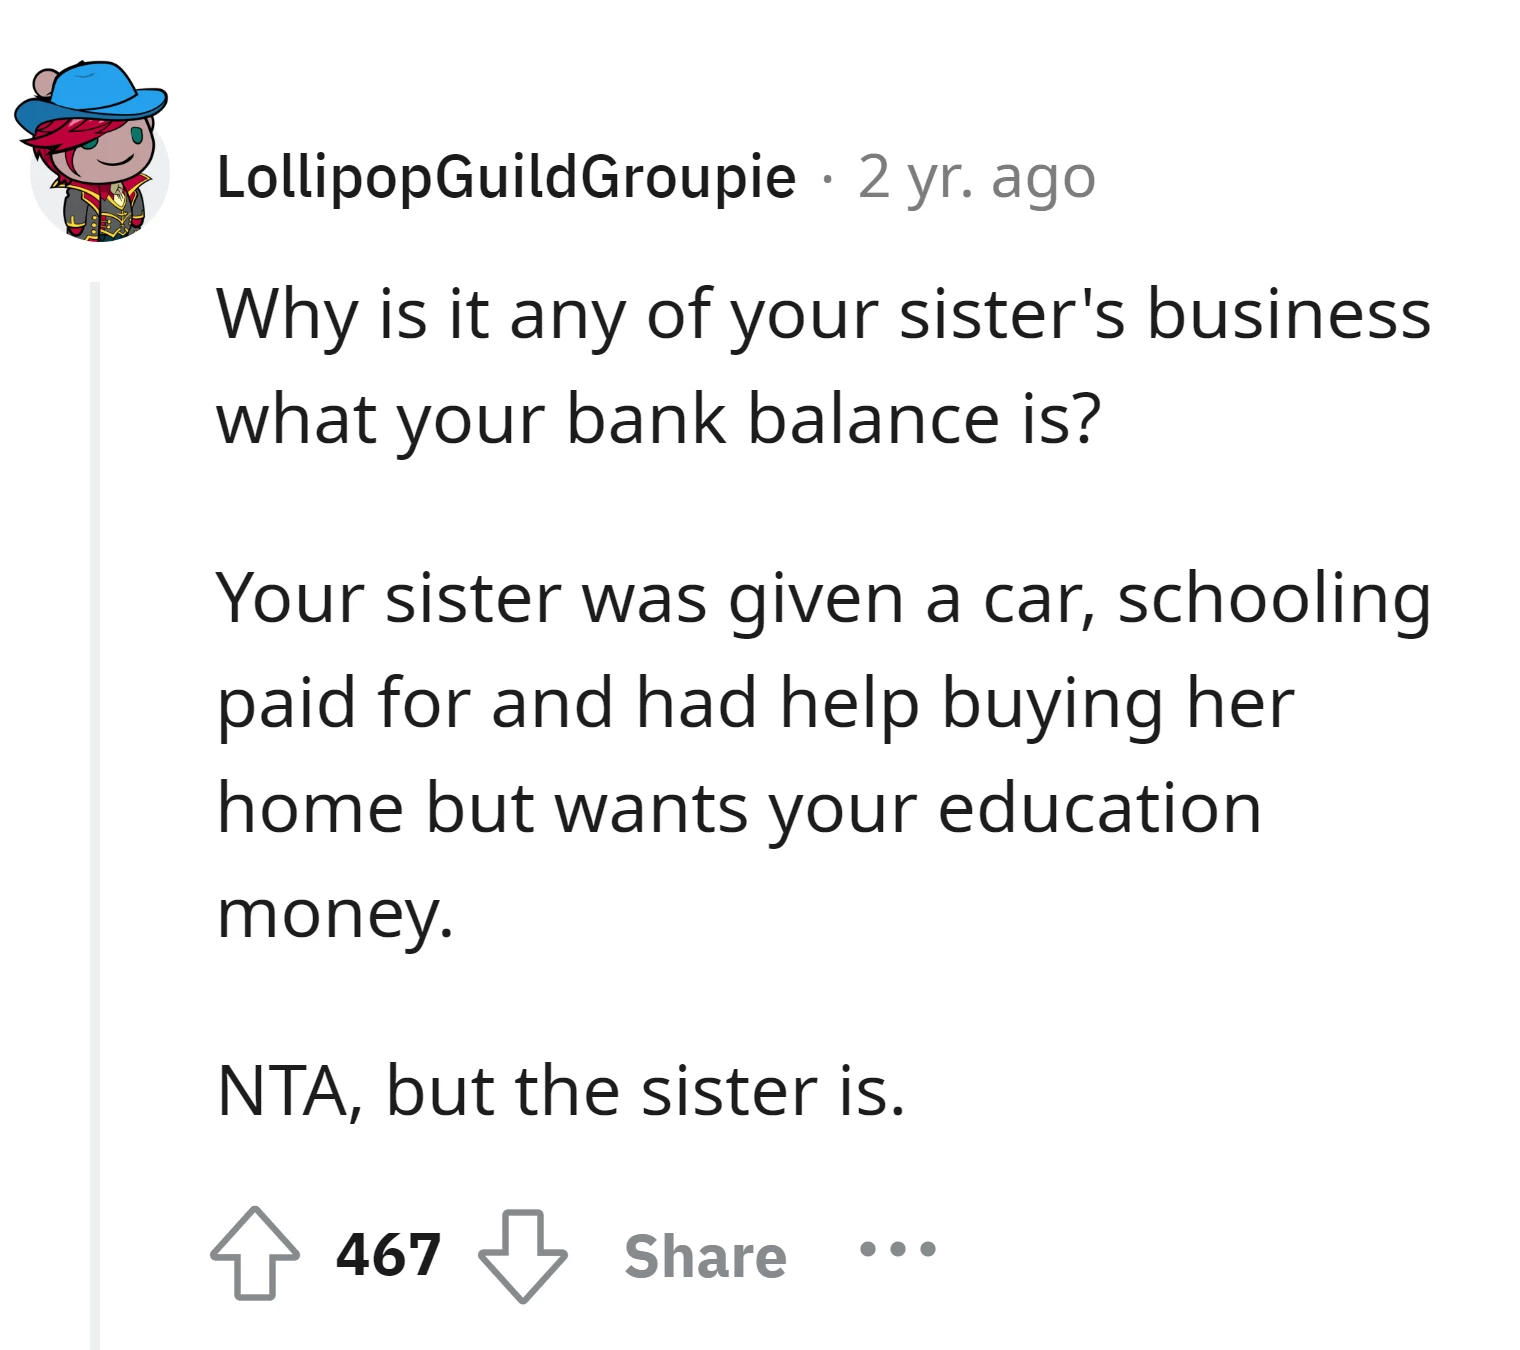 Your sister has no right to inquire about the your bank balance